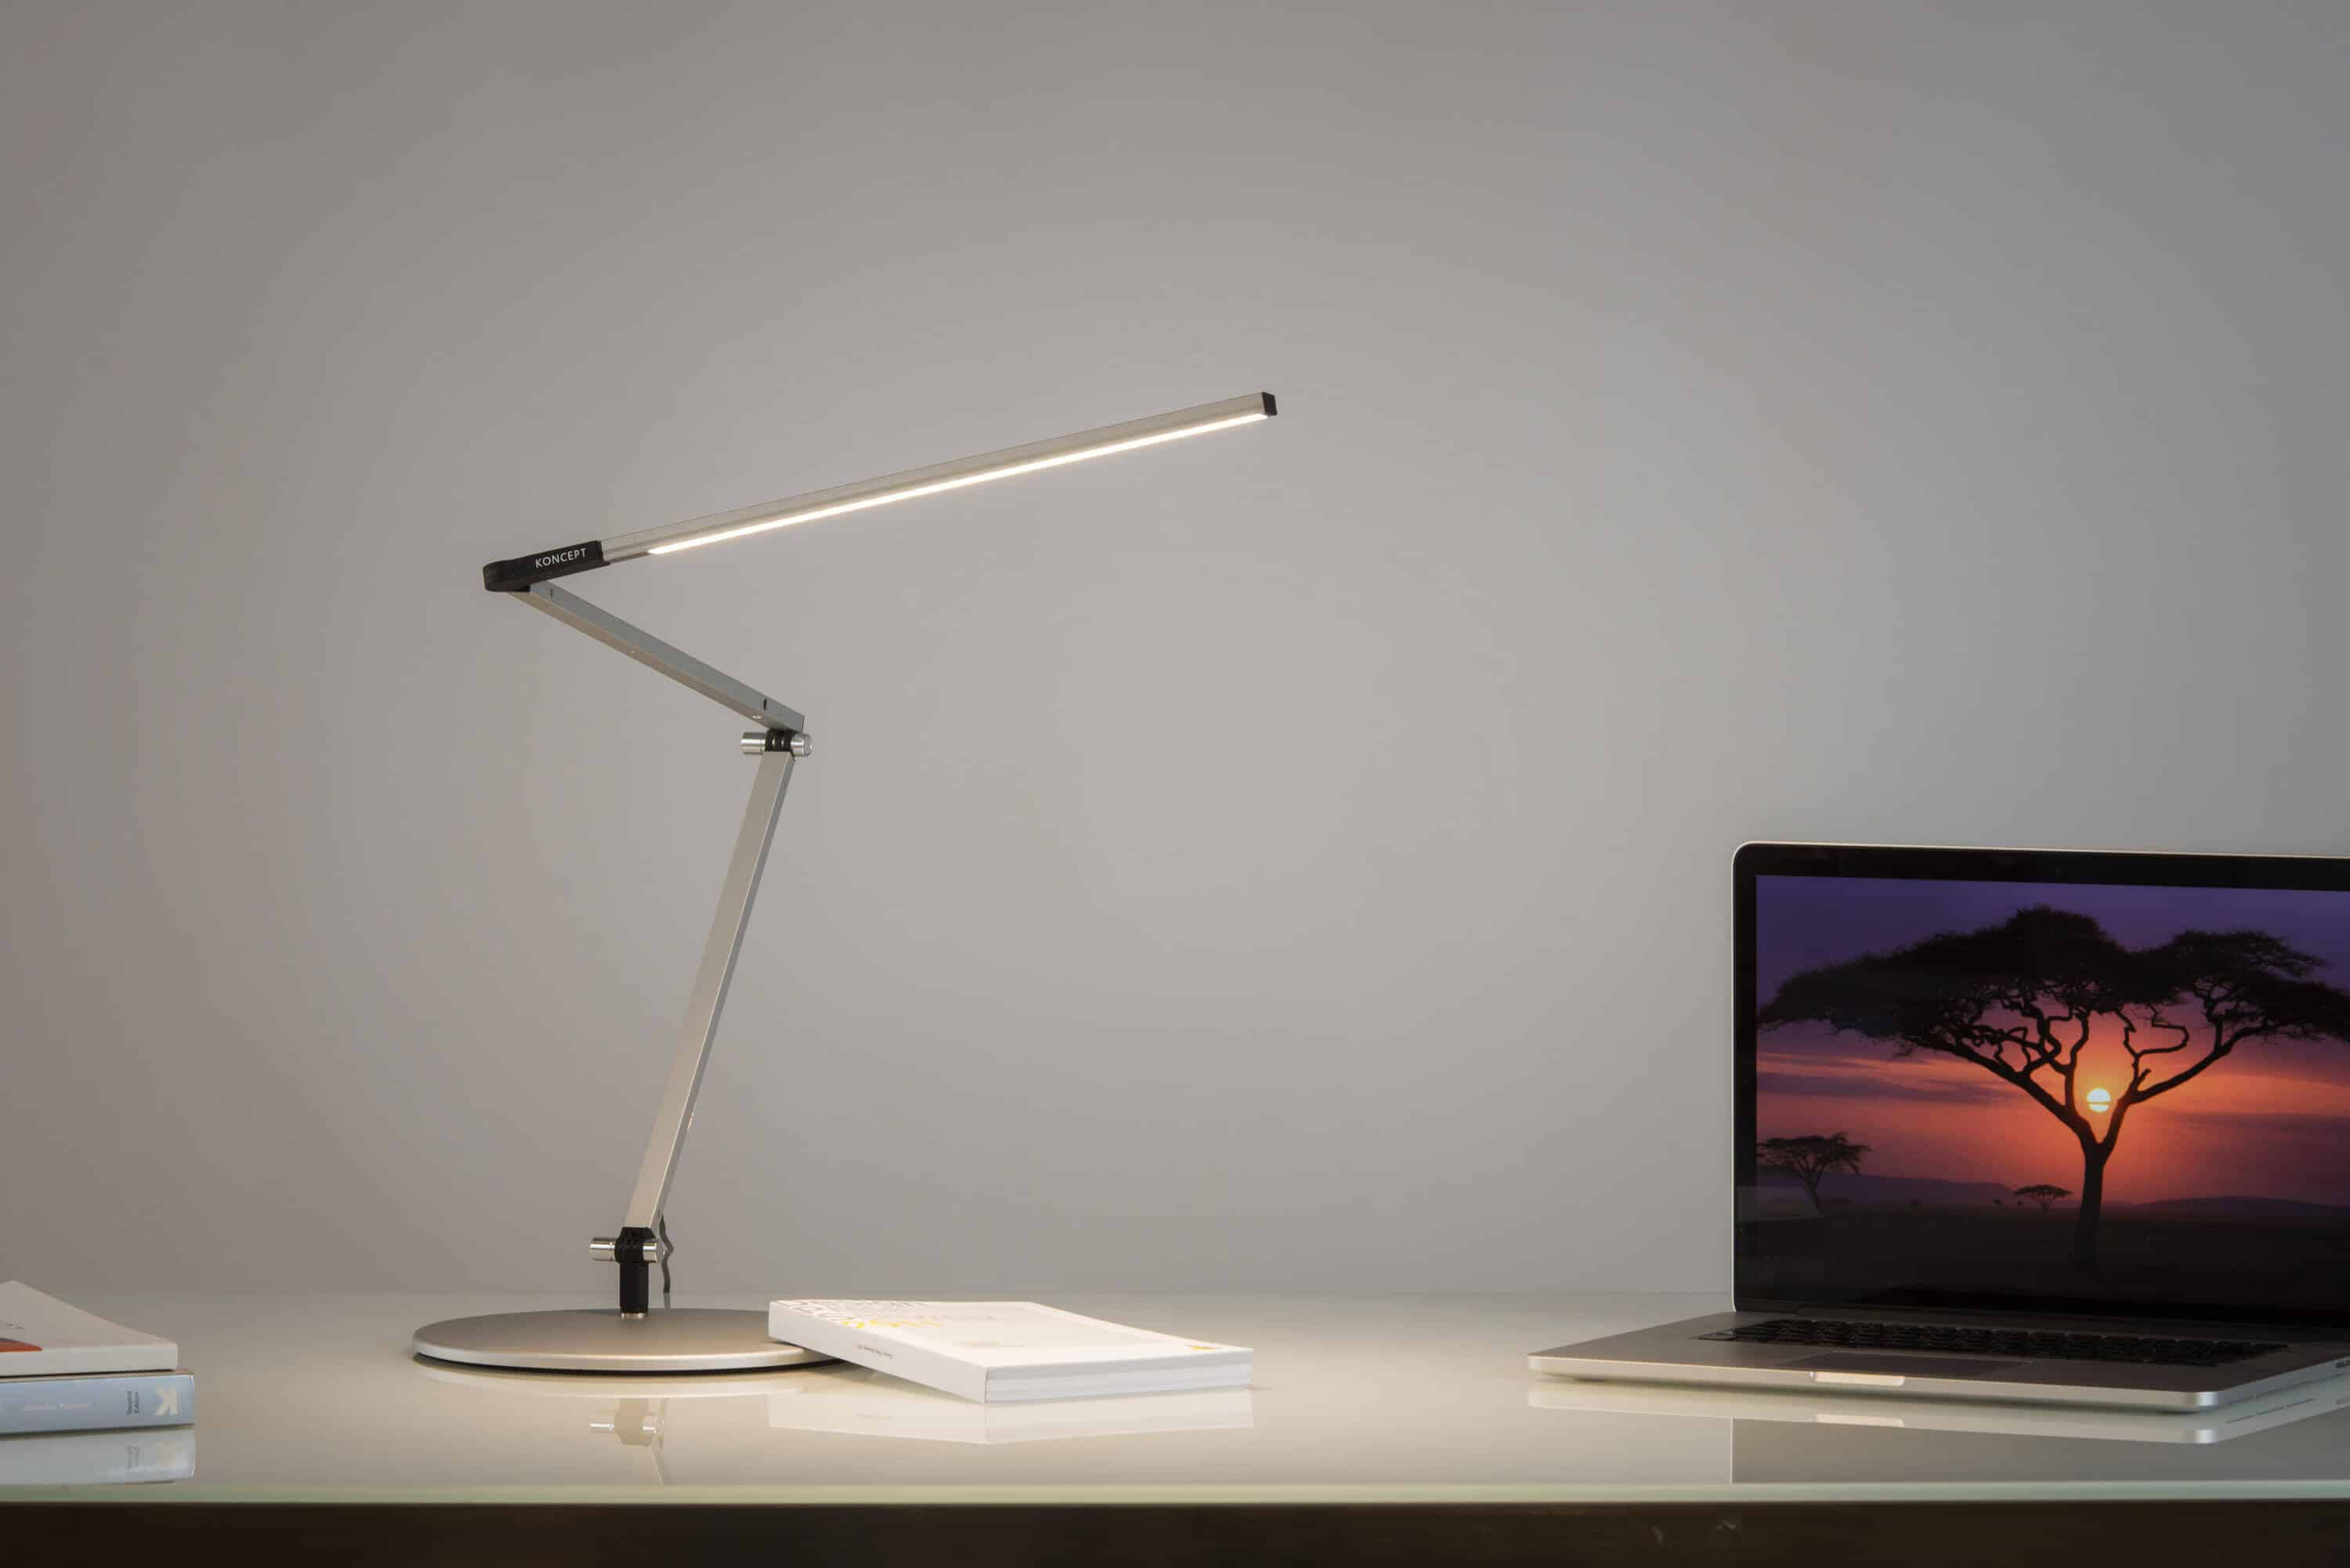 The Best Led Desk Lamps Of 2019 Reactual intended for size 3000 X 2002